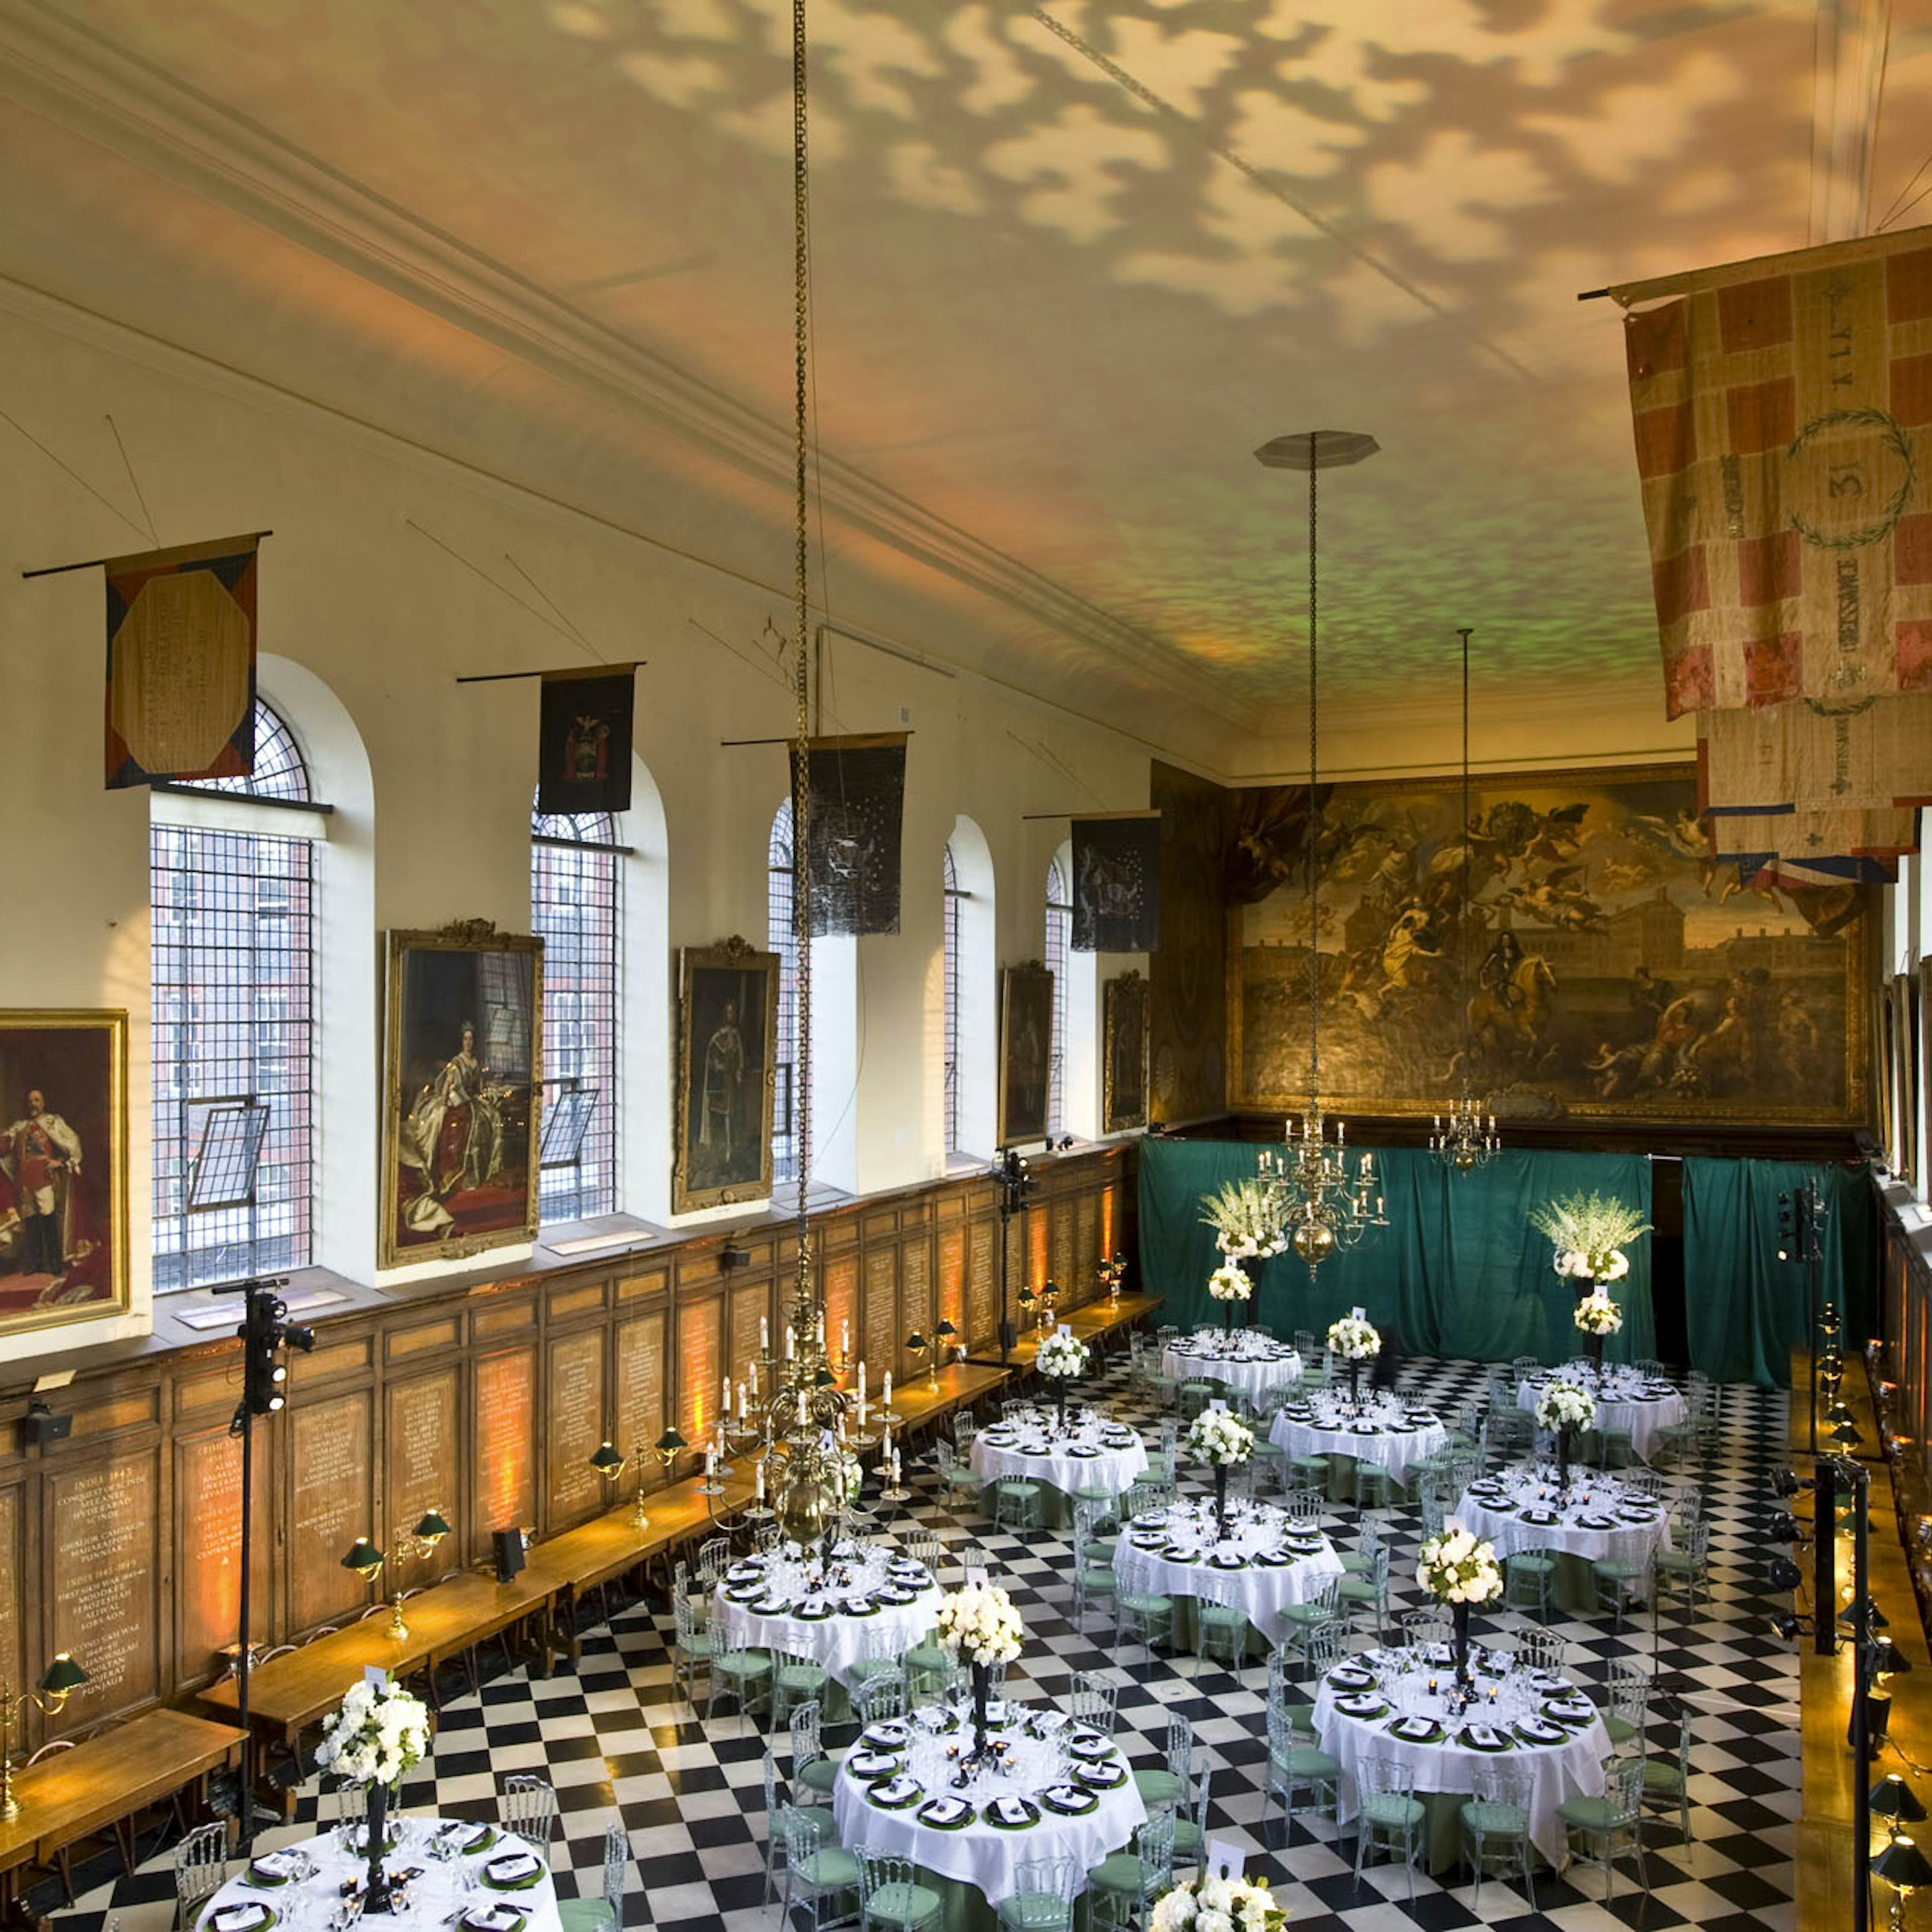 Royal Hospital Chelsea - The Great Hall image 2